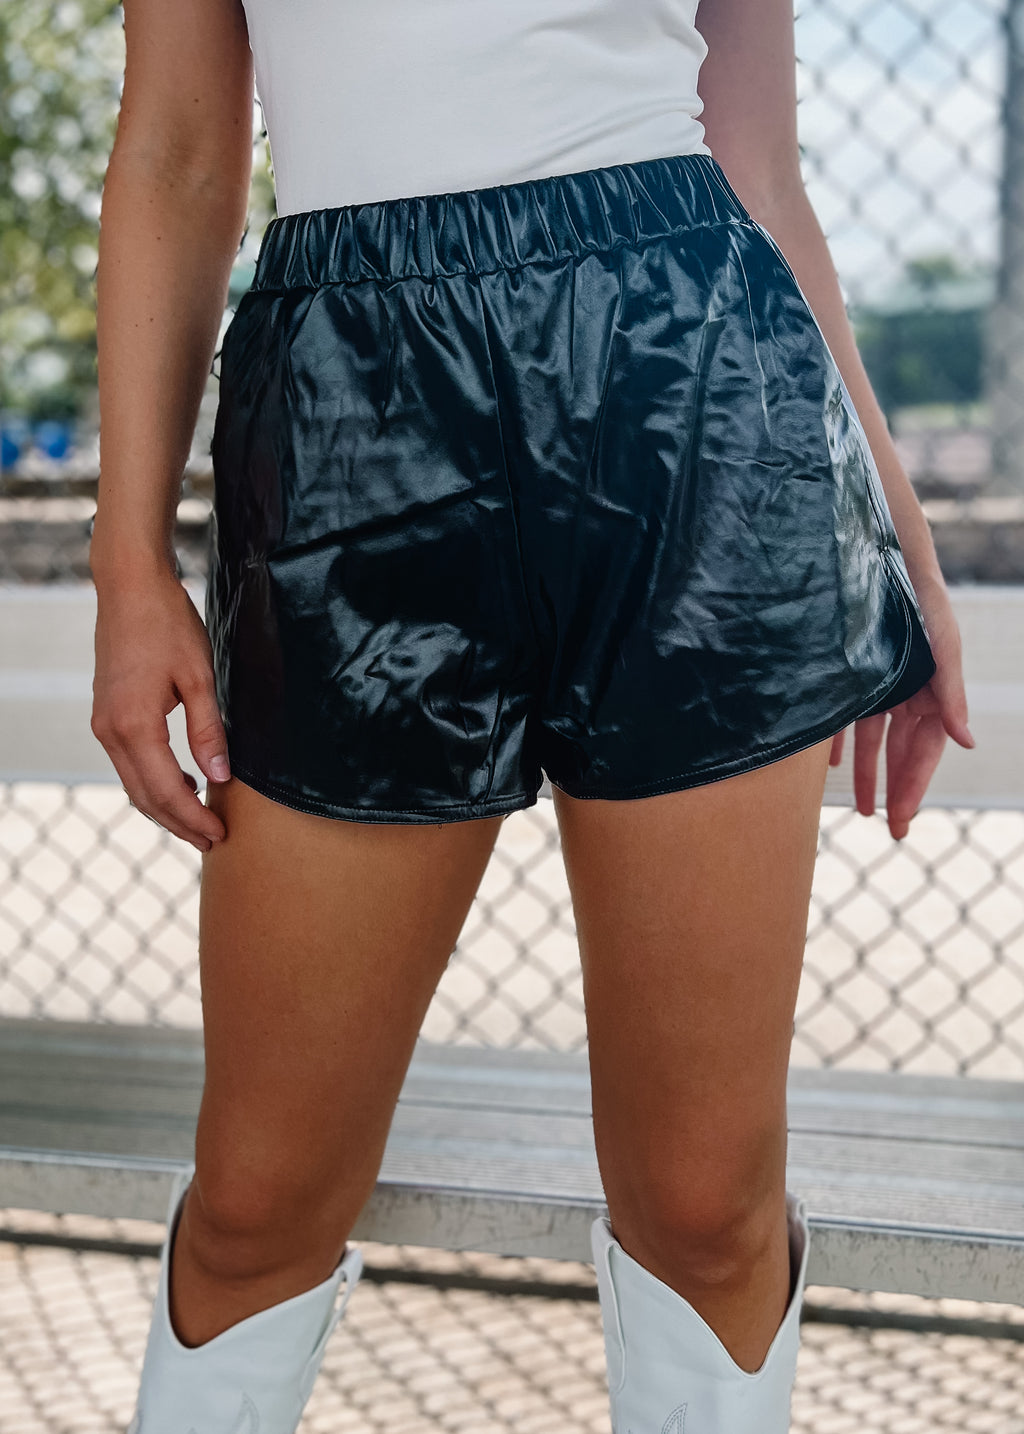 The Mint Julep Boutique Read The Room Vegan Leather Shorts